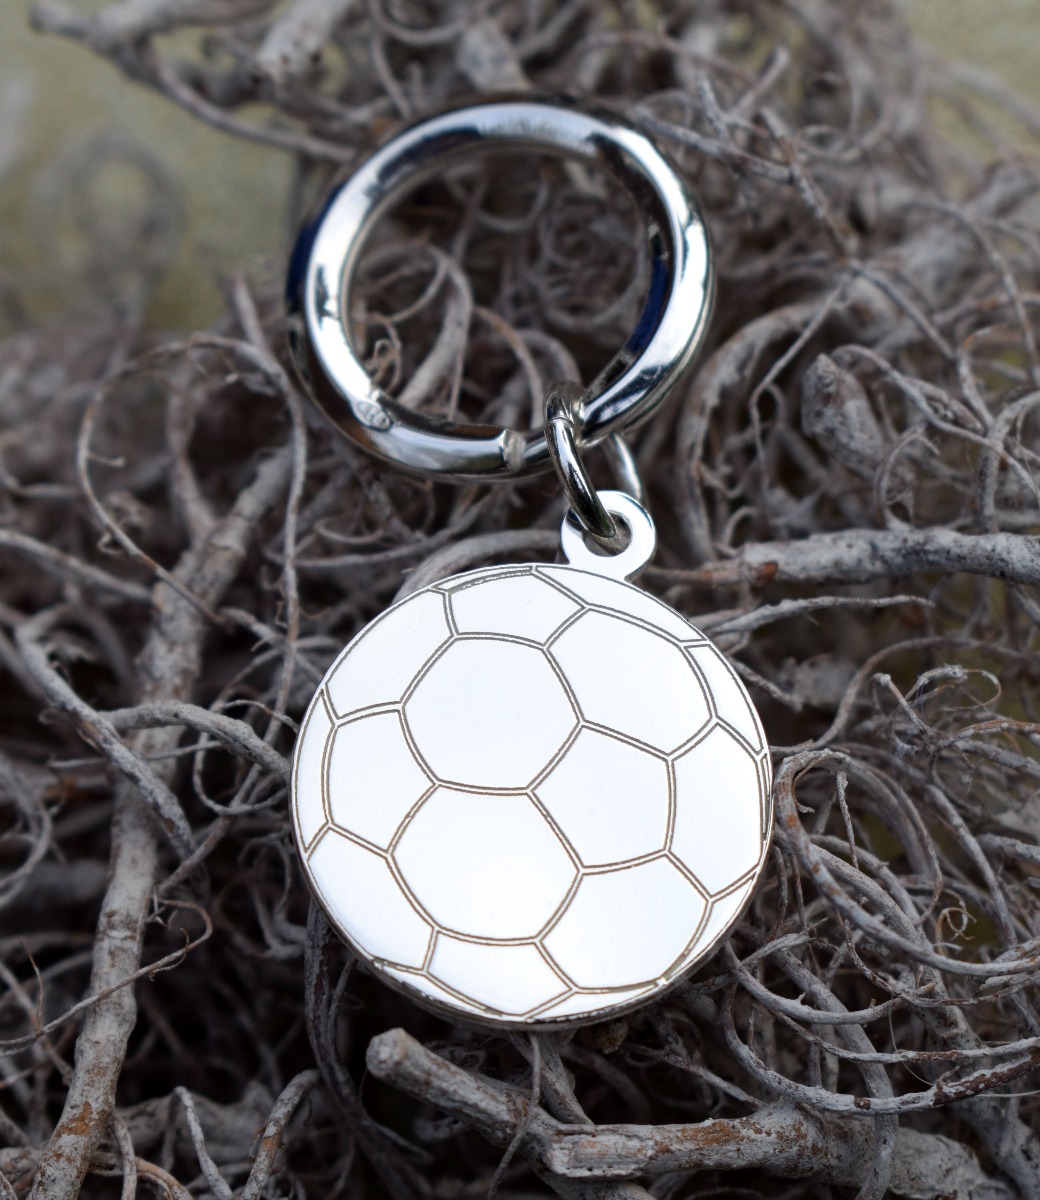 Sterling Silver Round Engraved Football Keyring